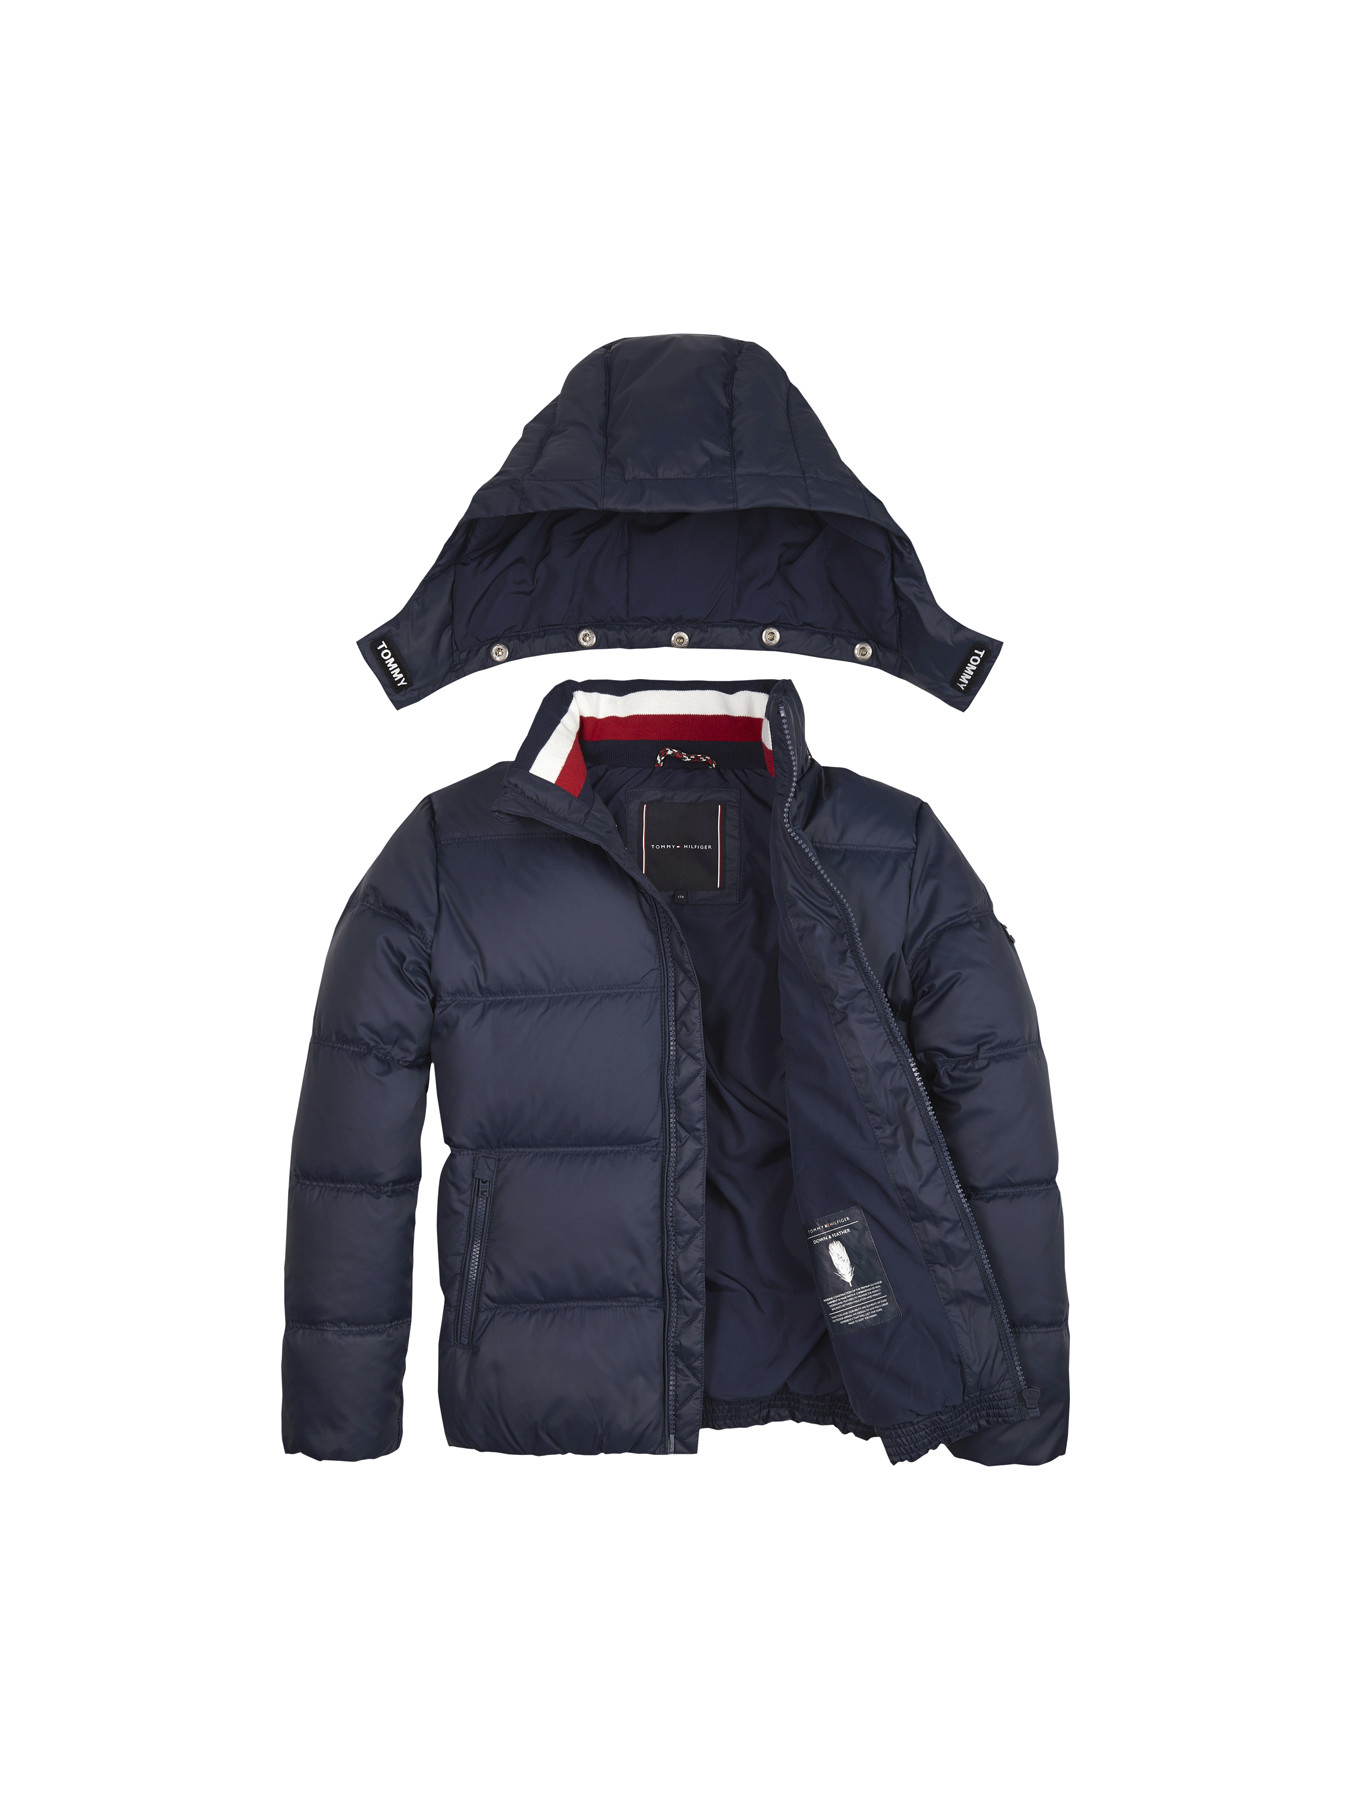 AJh,tommy jeans essential down gilet,hrdsindia.org